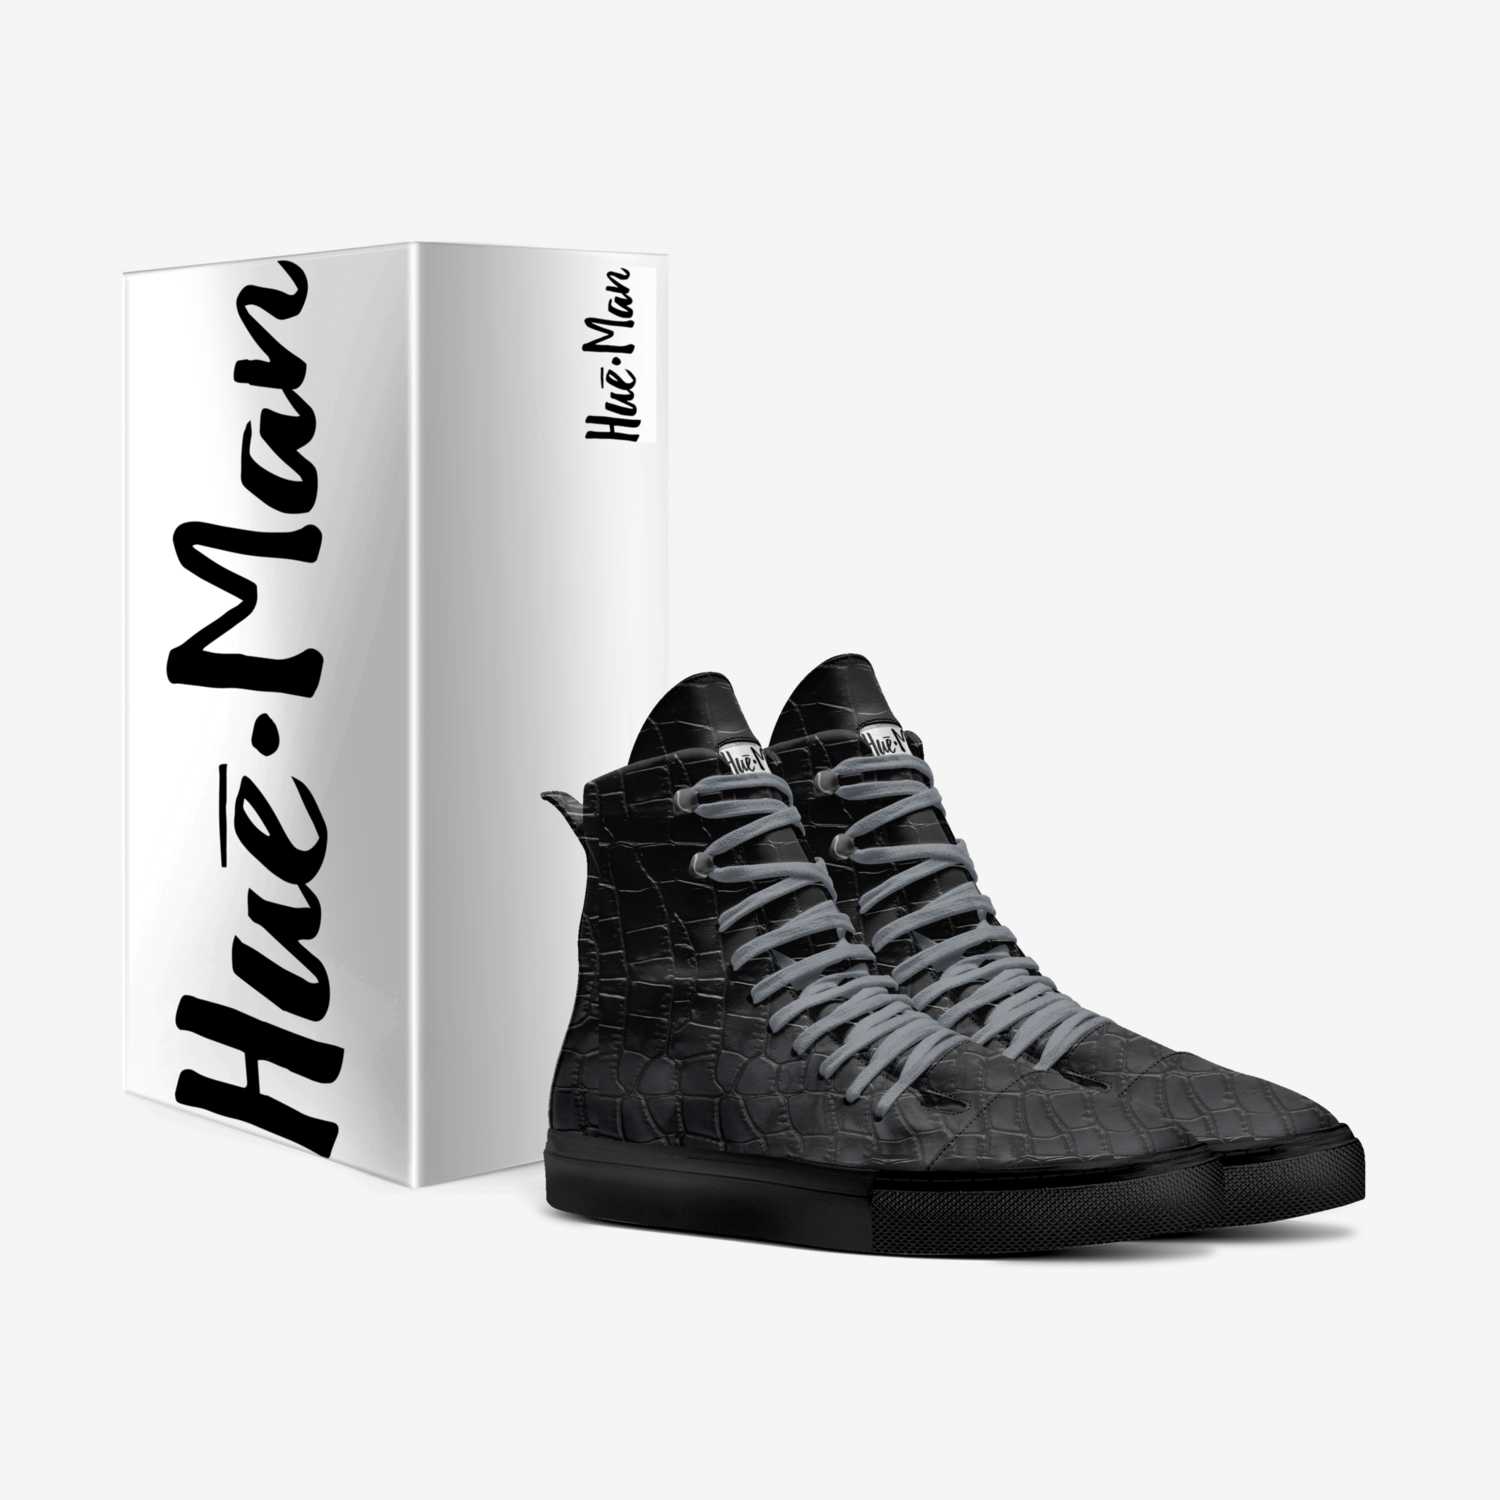 Hue-Man custom made in Italy shoes by Day1 J | Box view